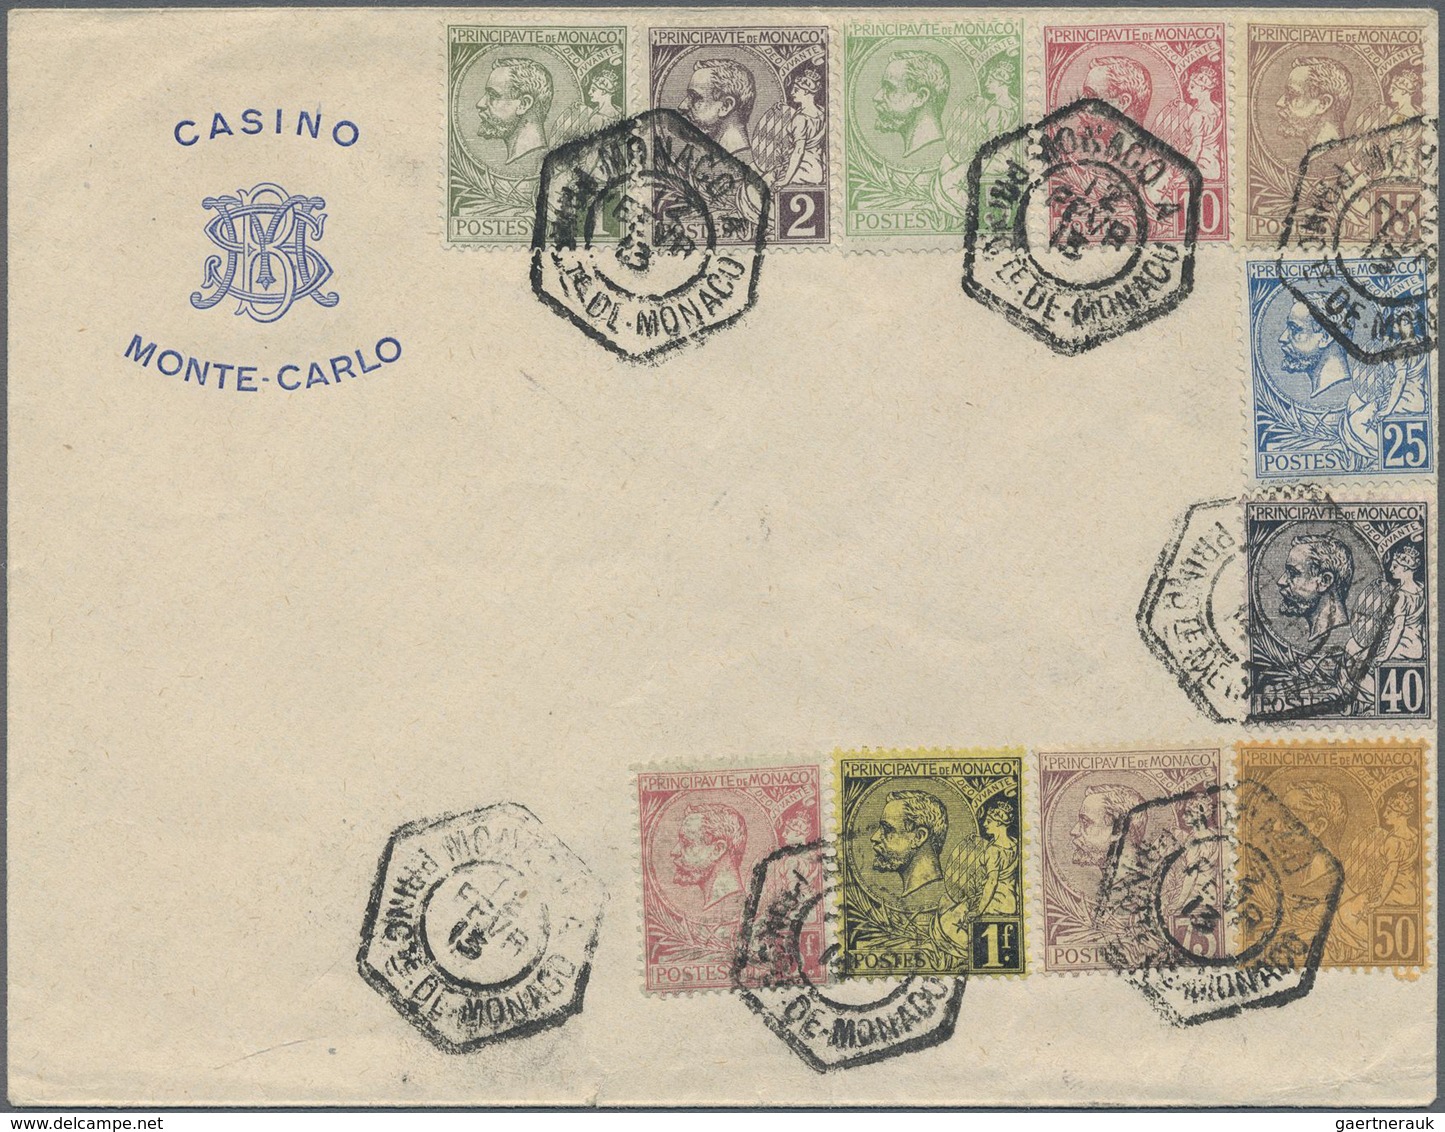 Br Monaco: 1891, 1 C Oliv To 5 Fr Carmine Cancelled 1913 Complete On Envelope "Casino Monte-Carlo" - Neufs